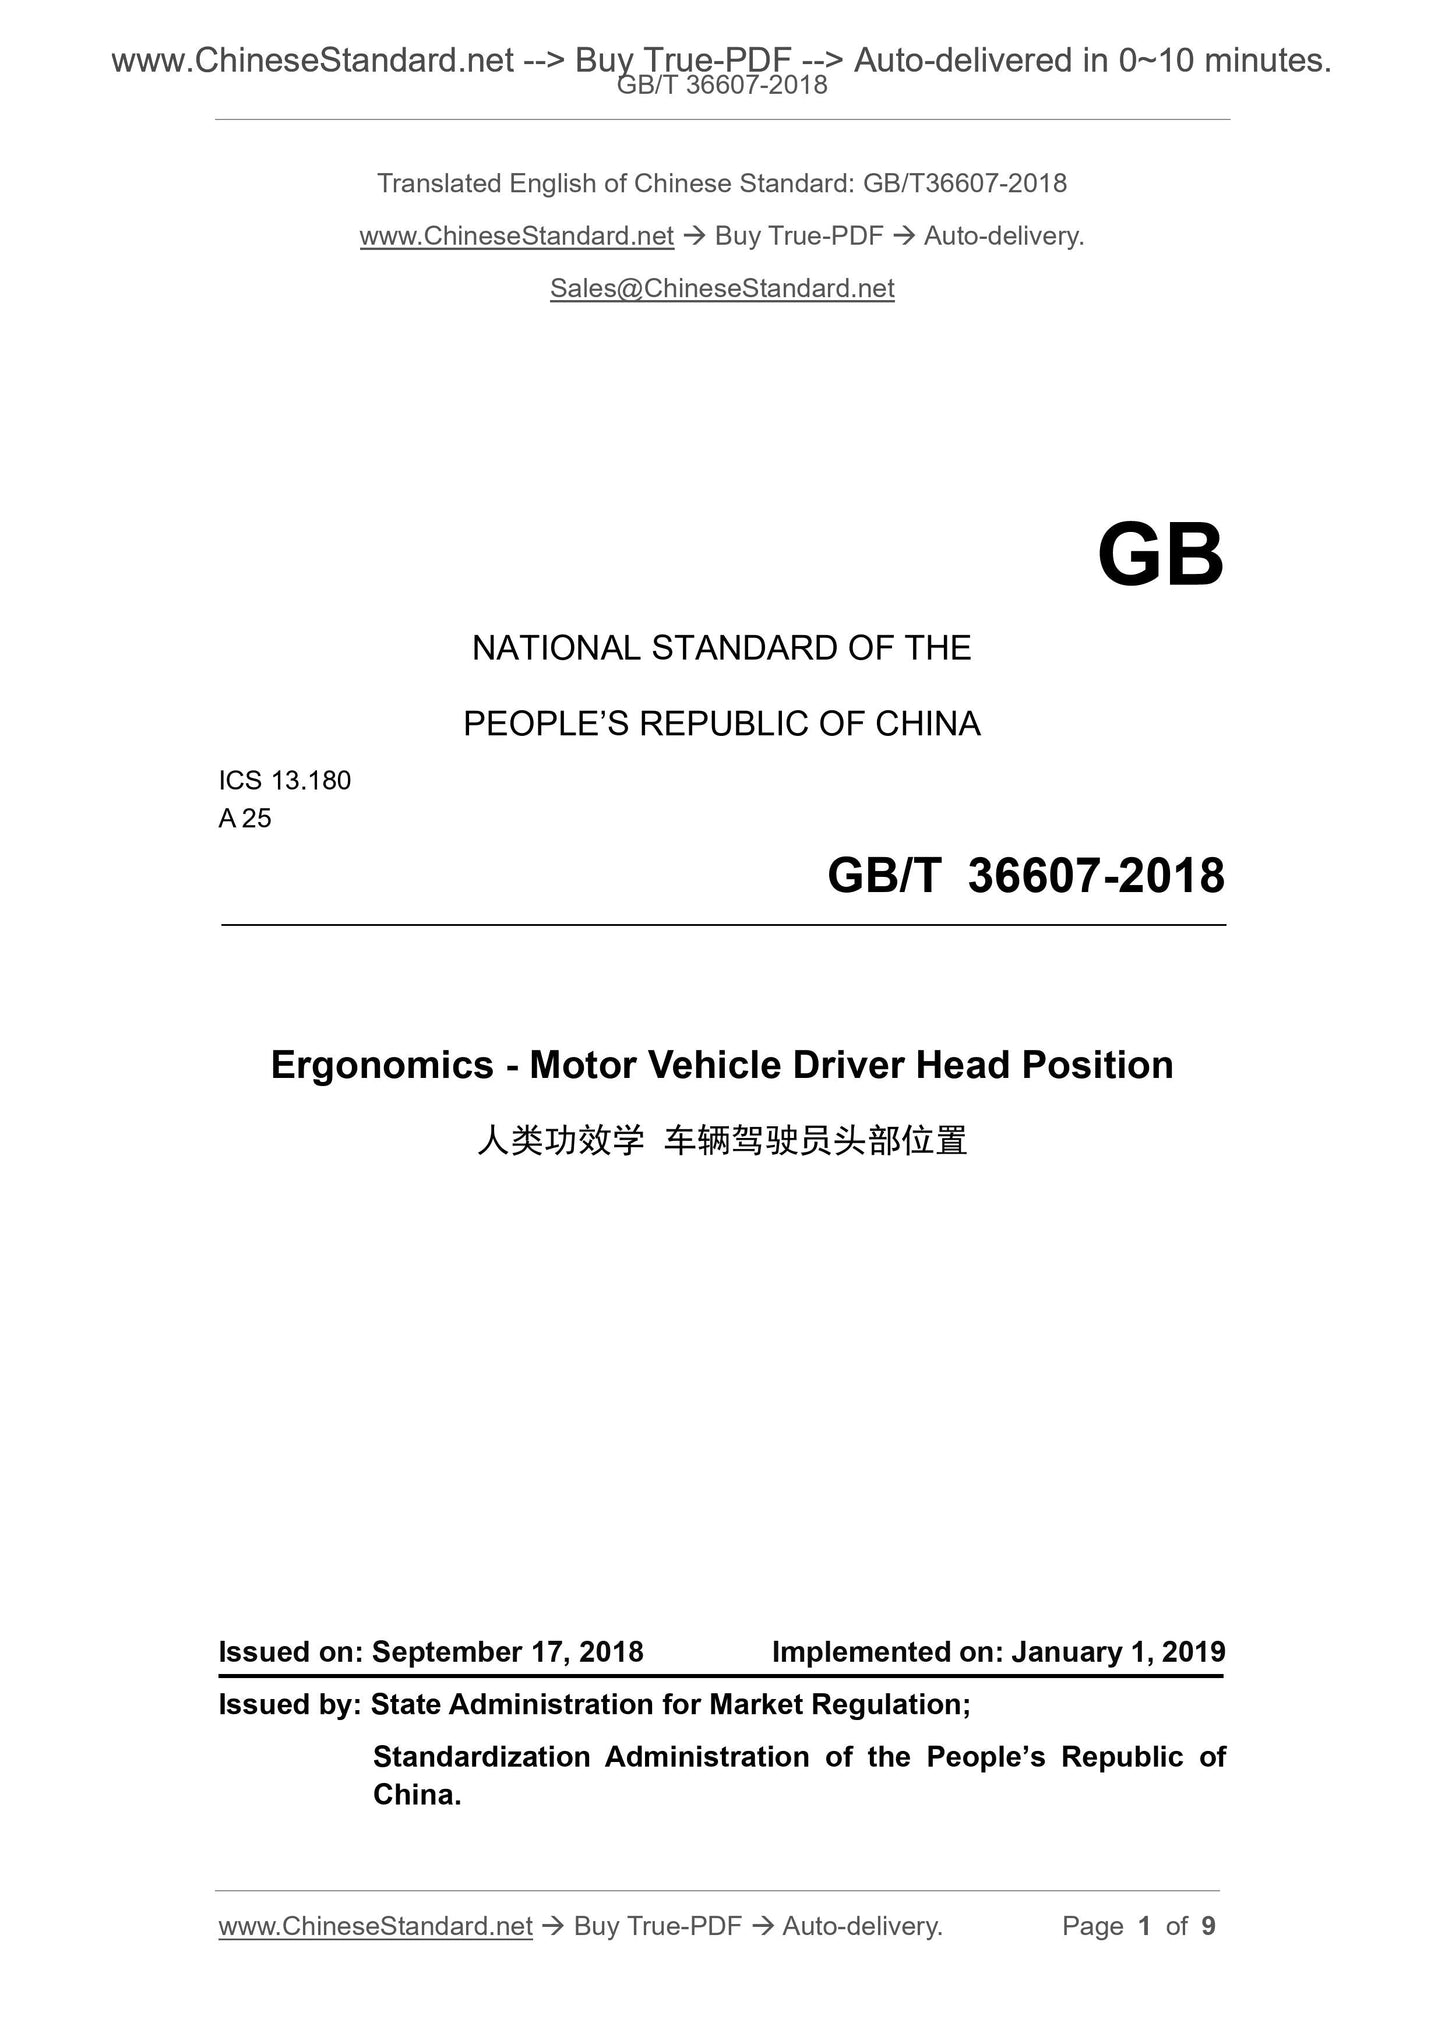 GB/T 36607-2018 Page 1